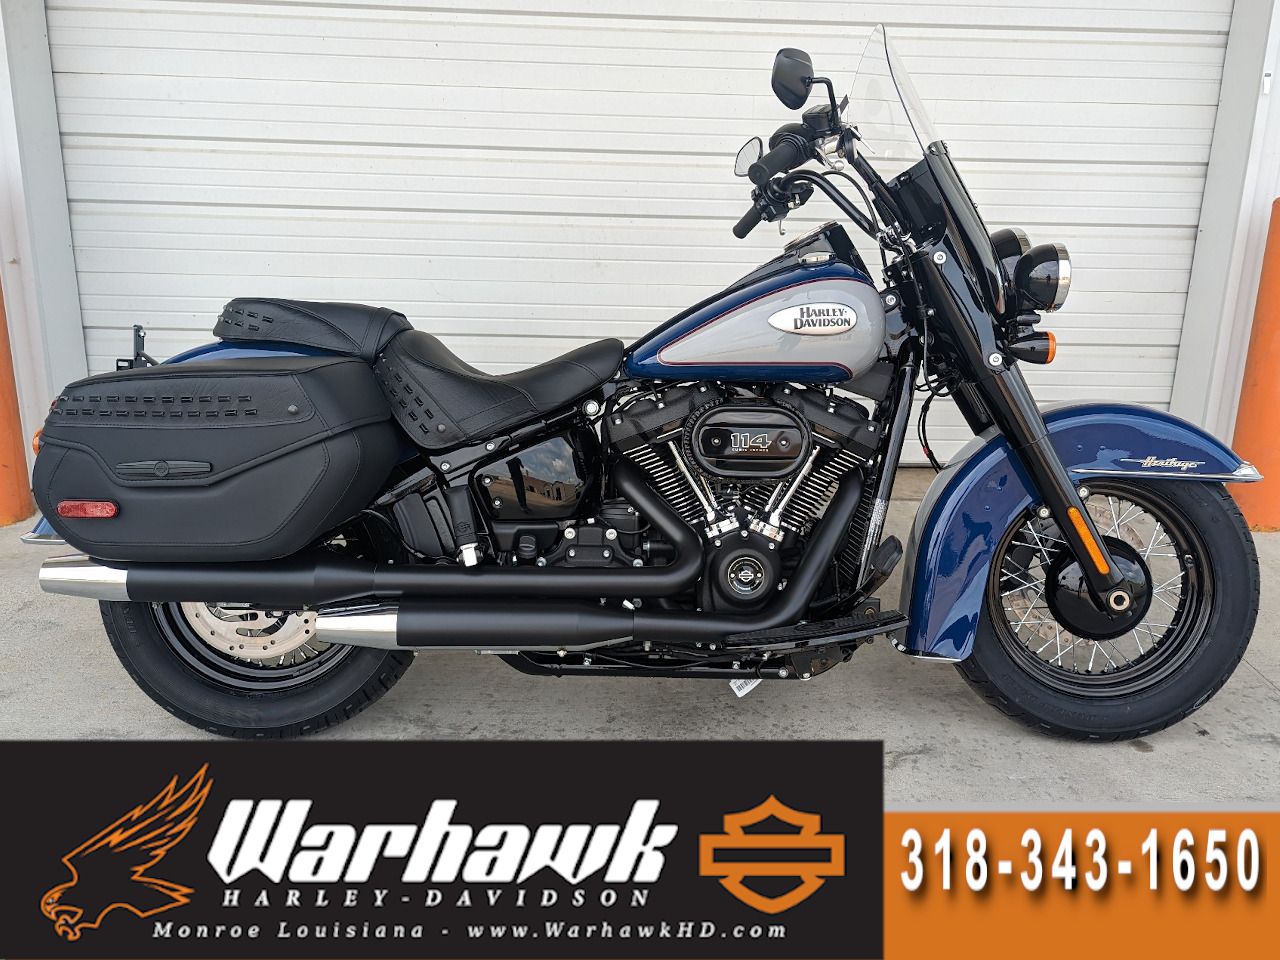 2023 harley davidson heritage classic 114 for sale near me - Photo 1